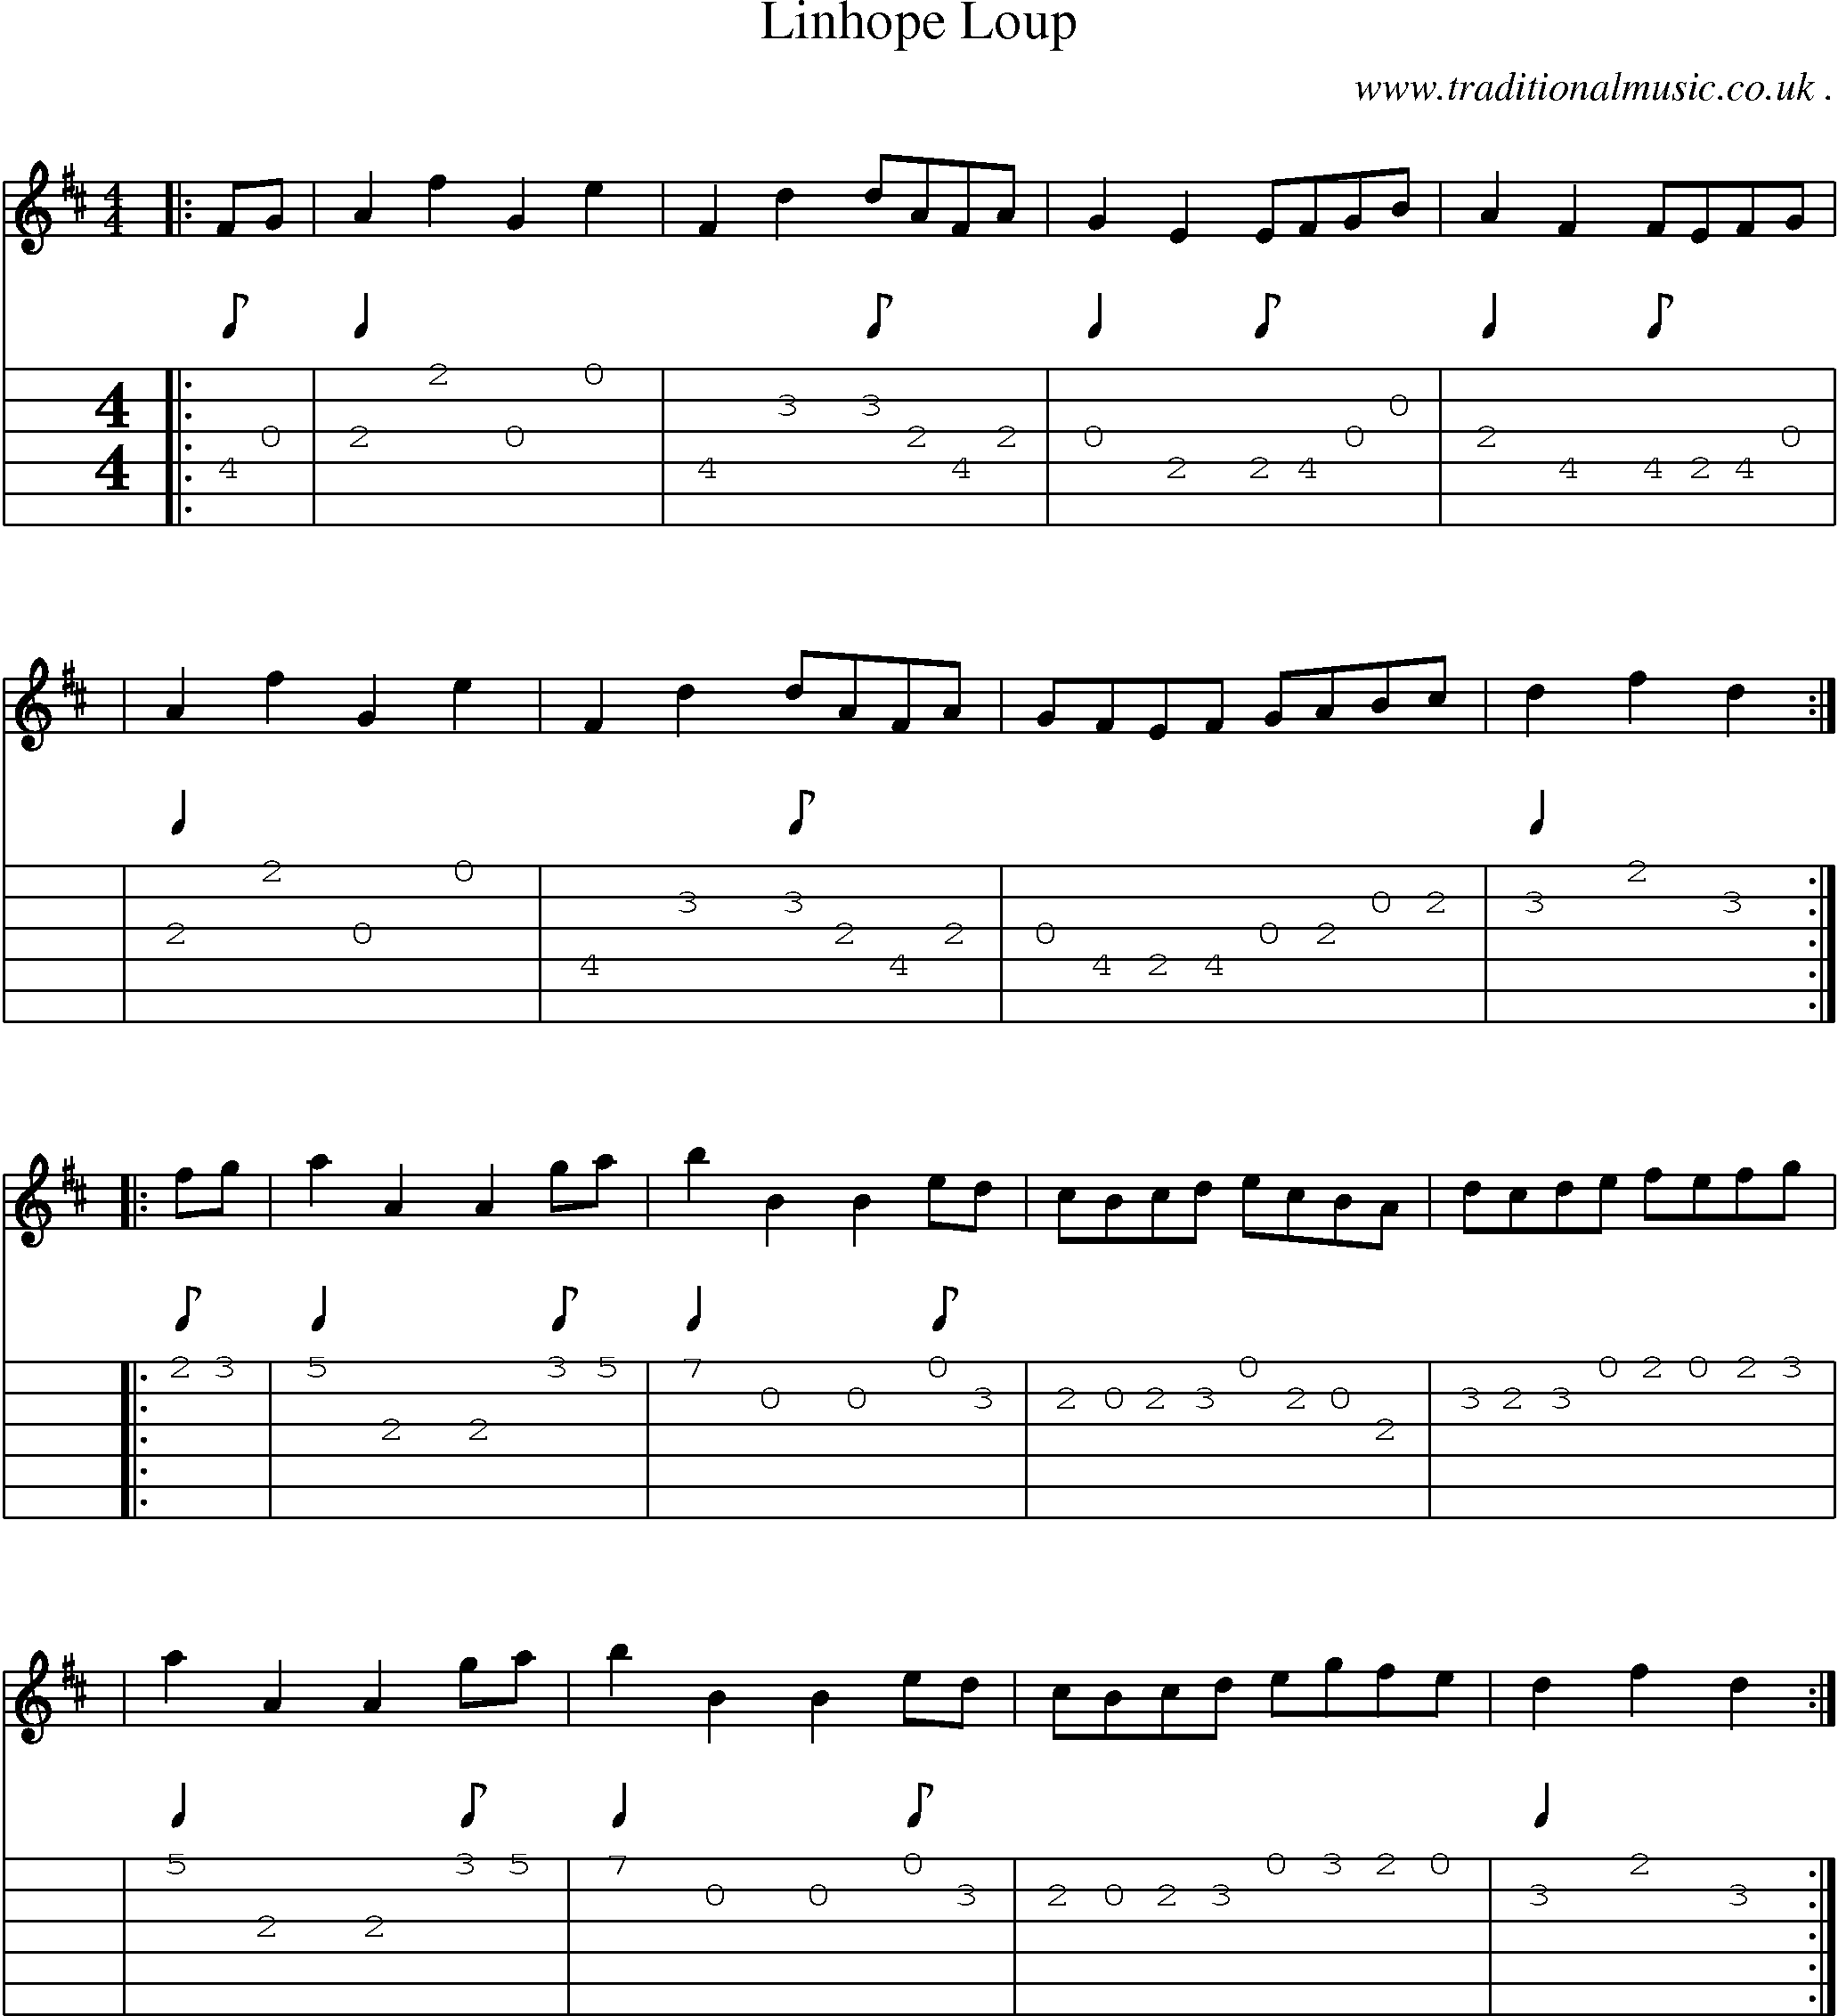 Sheet-Music and Guitar Tabs for Linhope Loup